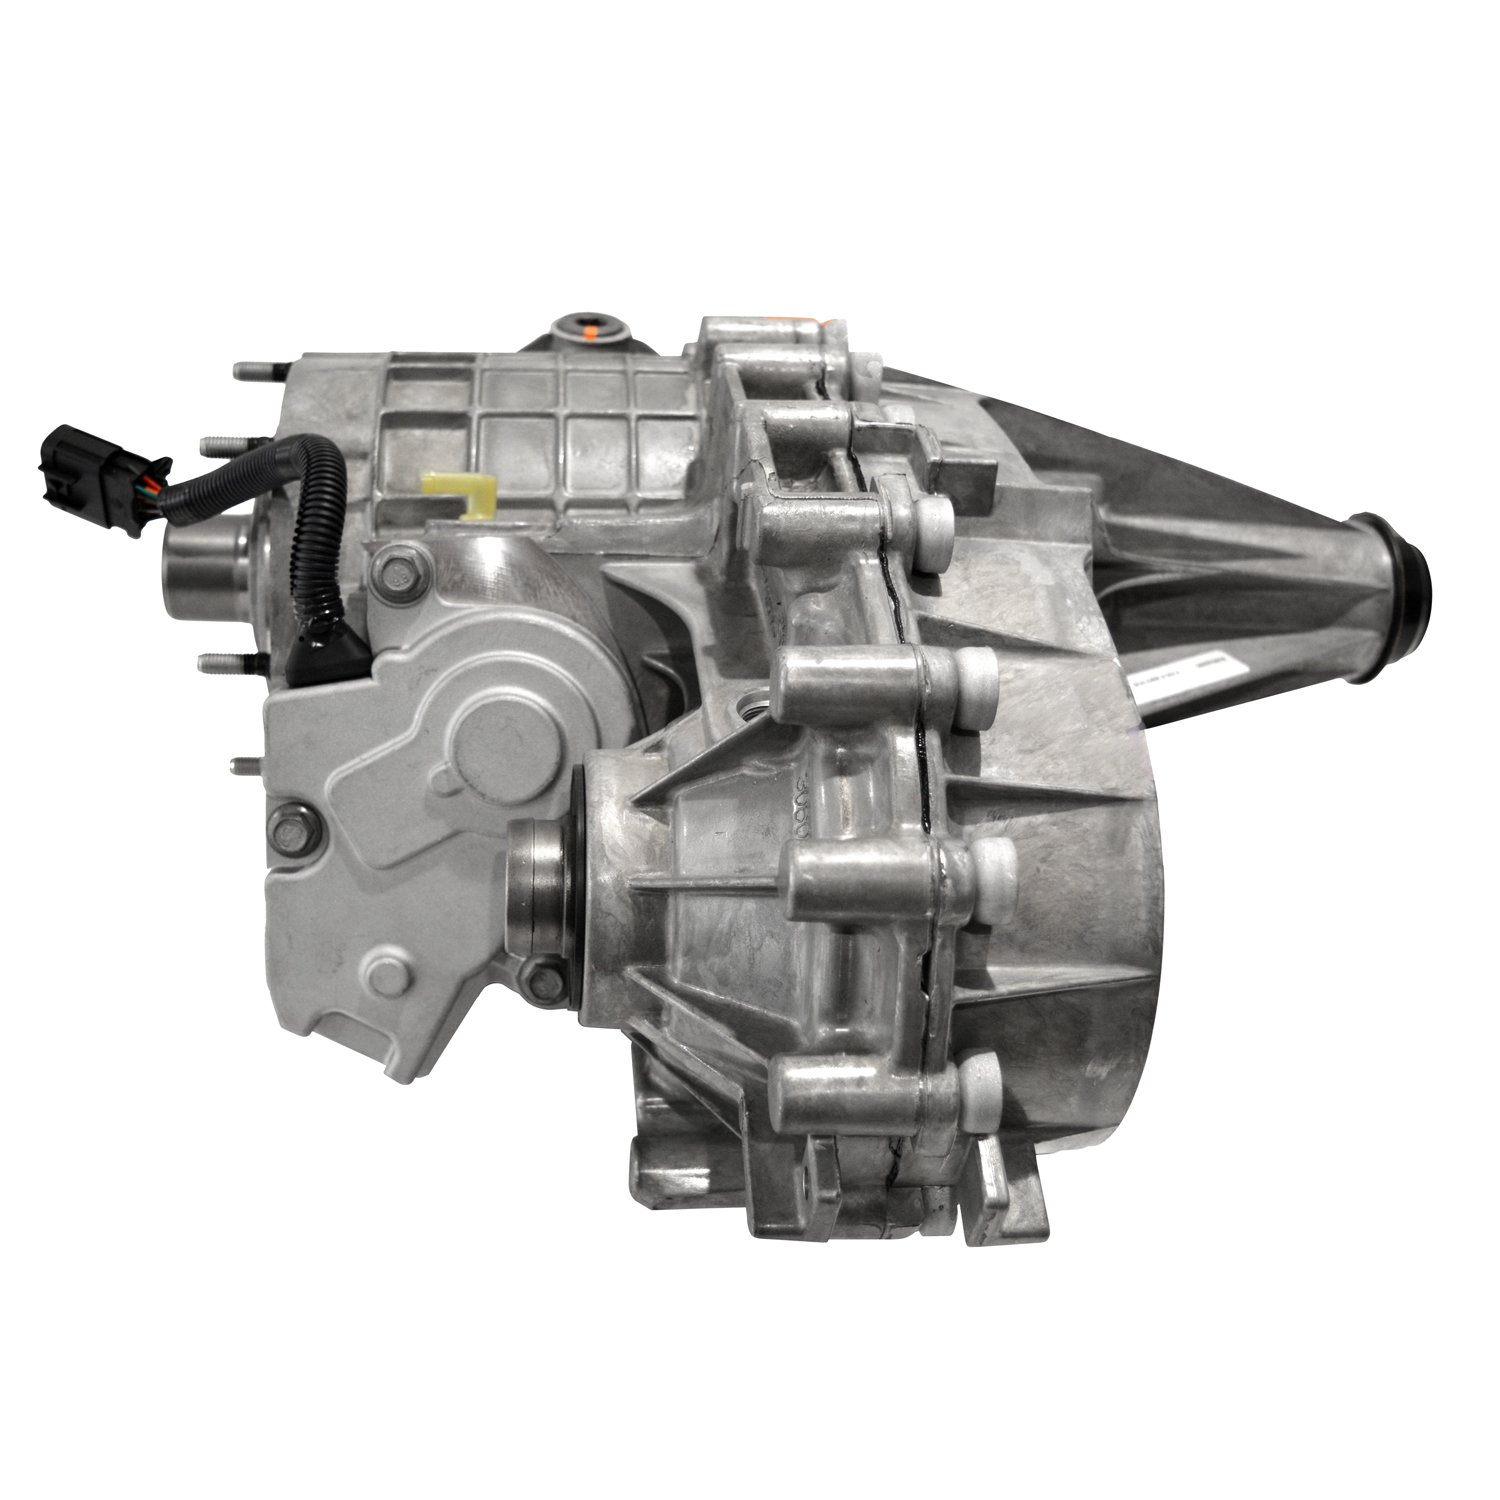 Remanufactured Transfer Case for 2003-2007 General Motors with 4L60 & 4L70E, With Shift Motor